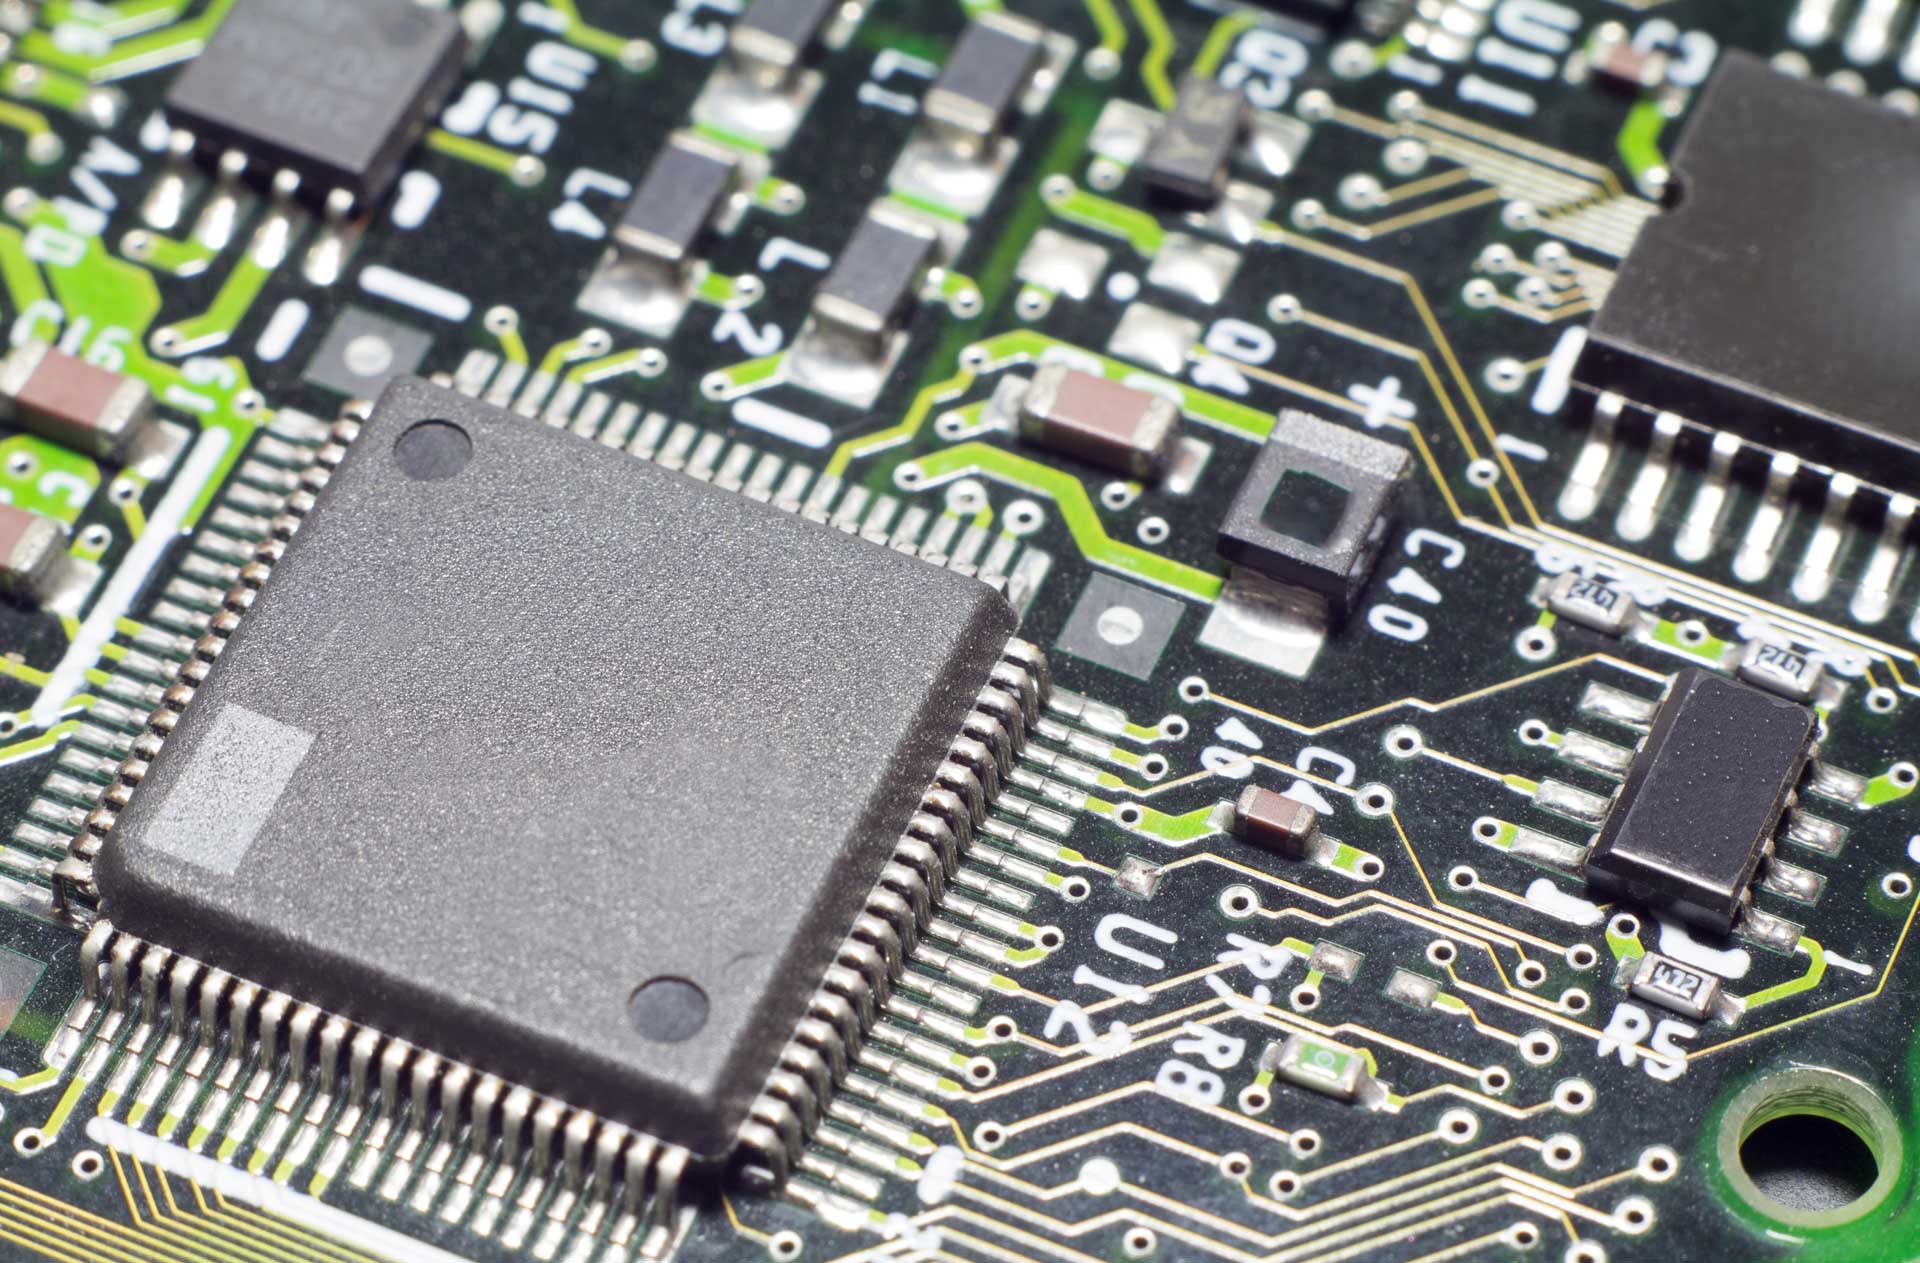 Manufactured motherboard chip made in an electronics factory with solutions for dust collection